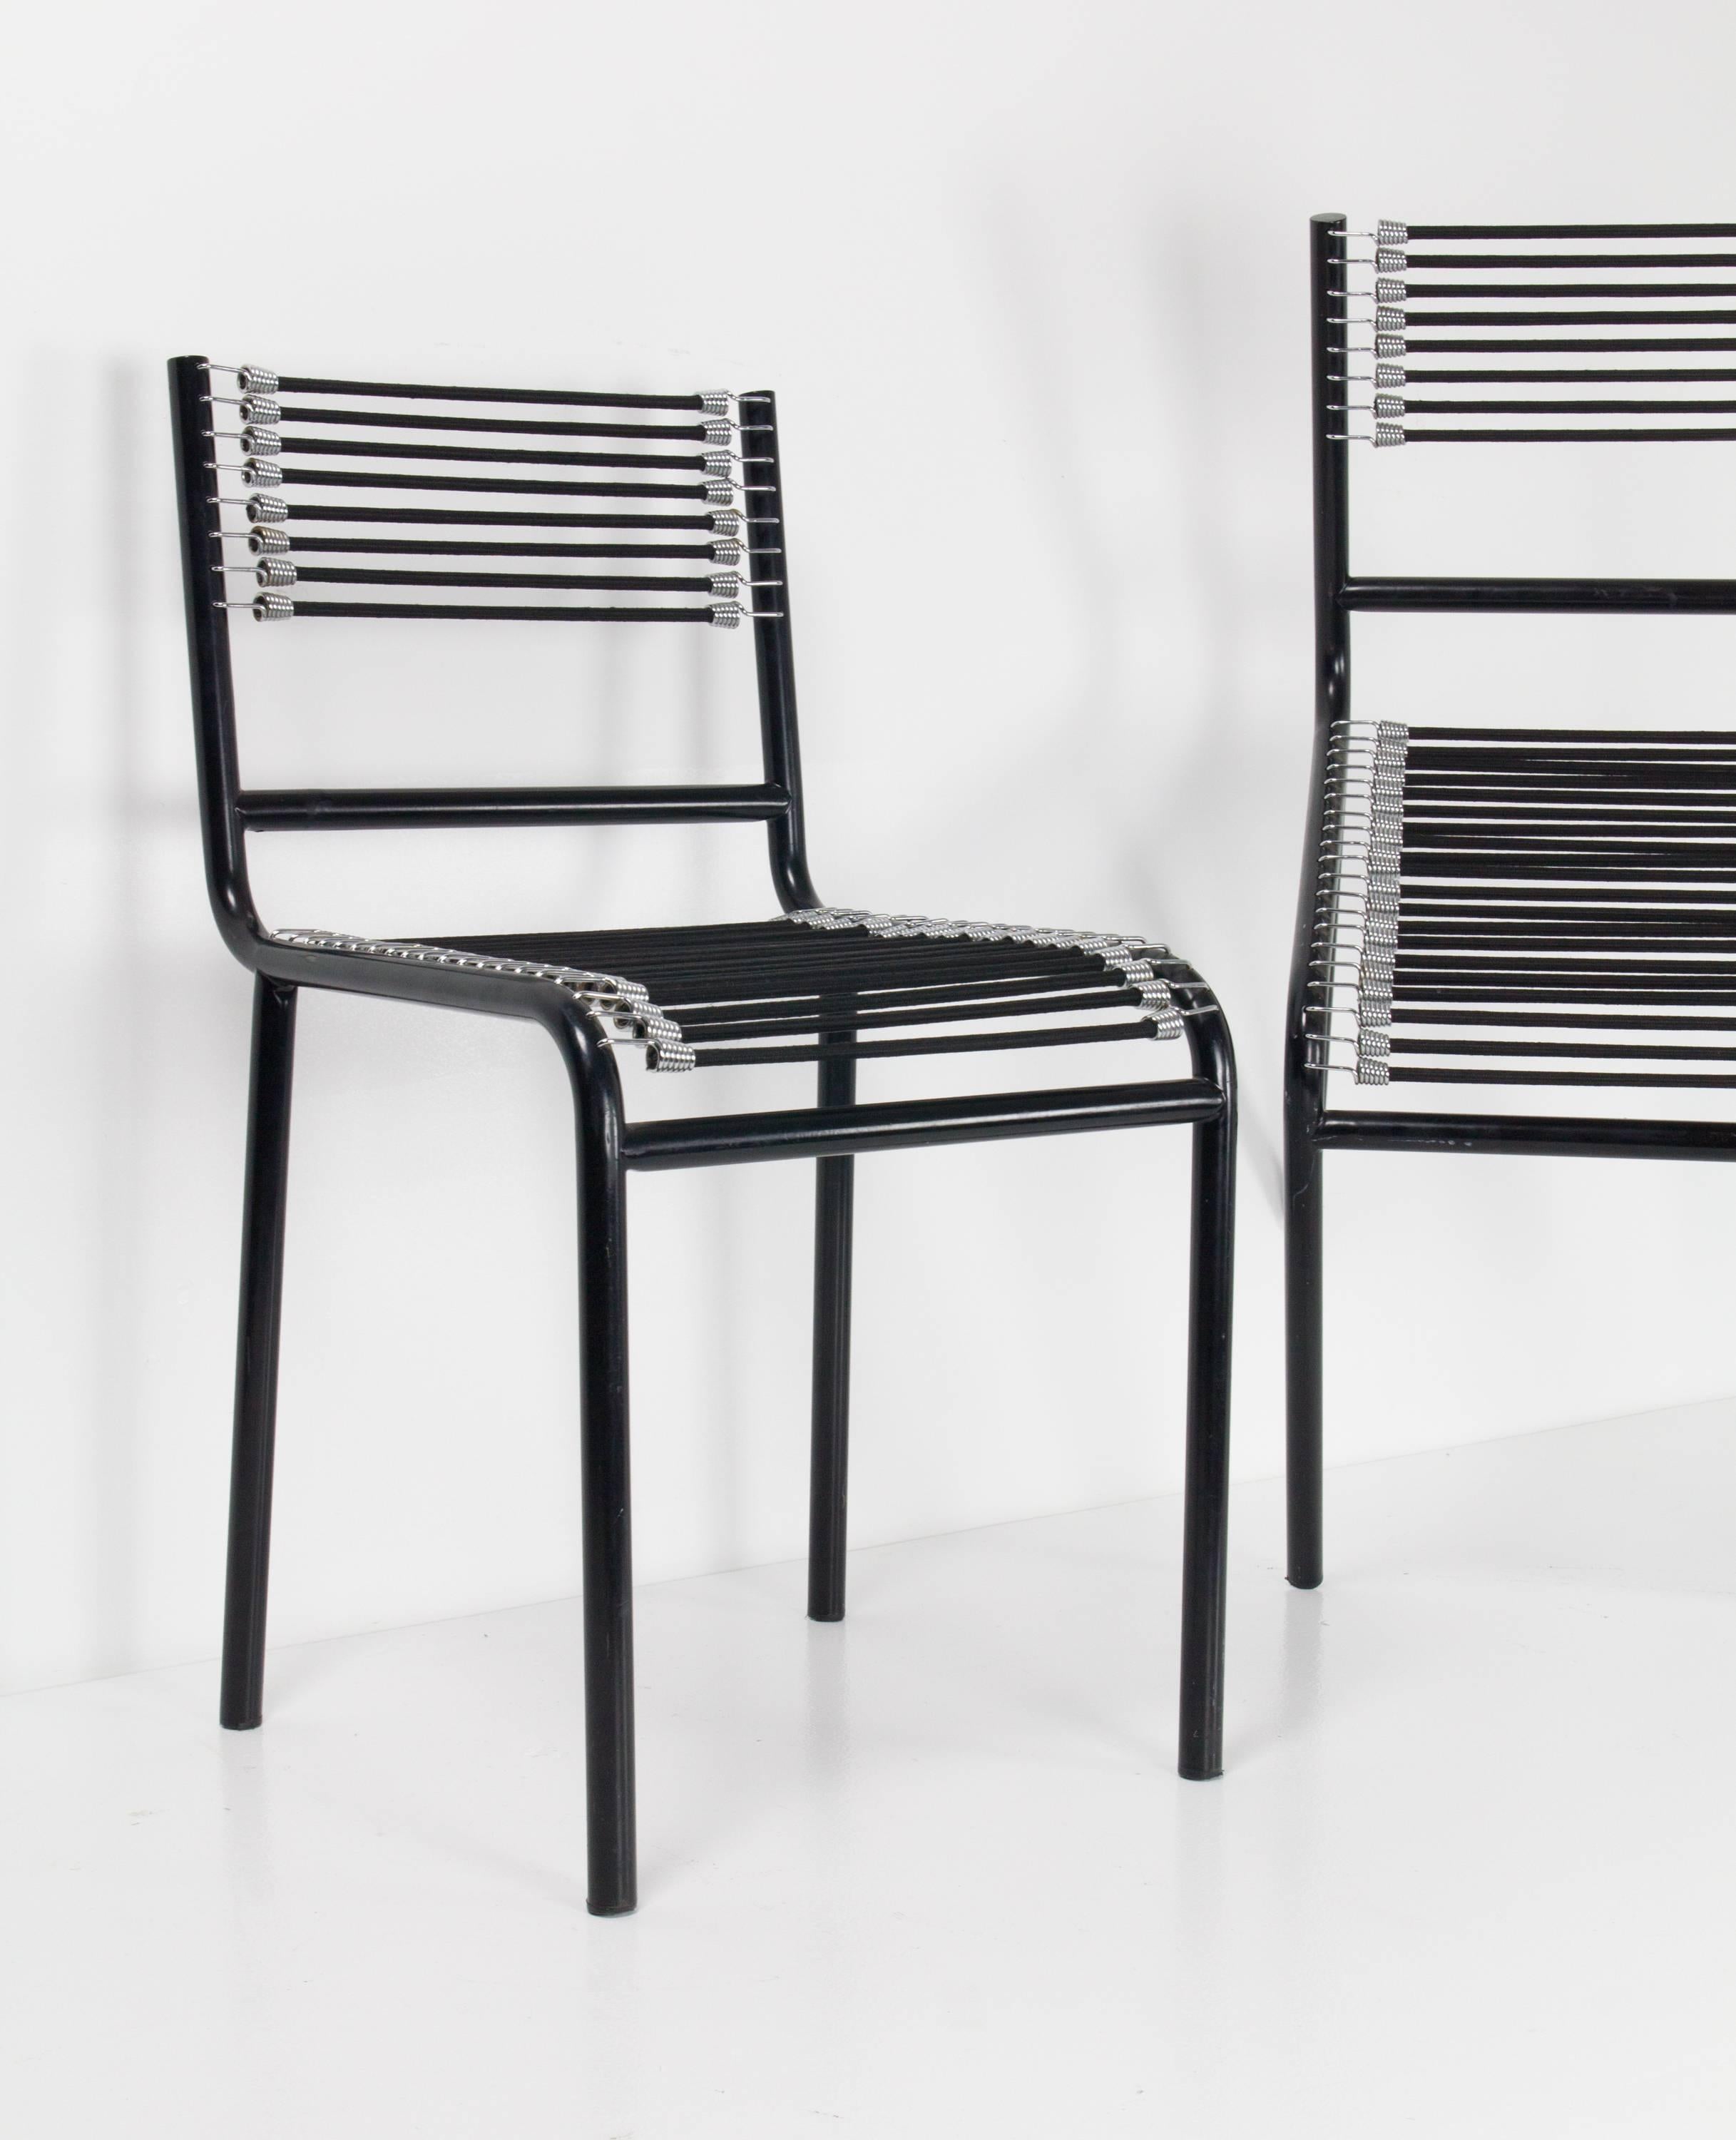 Pair of René Herbst Sandows chairs produced by Movimento Moderno with steel frames supporting elasticated straps as backrests and seats.